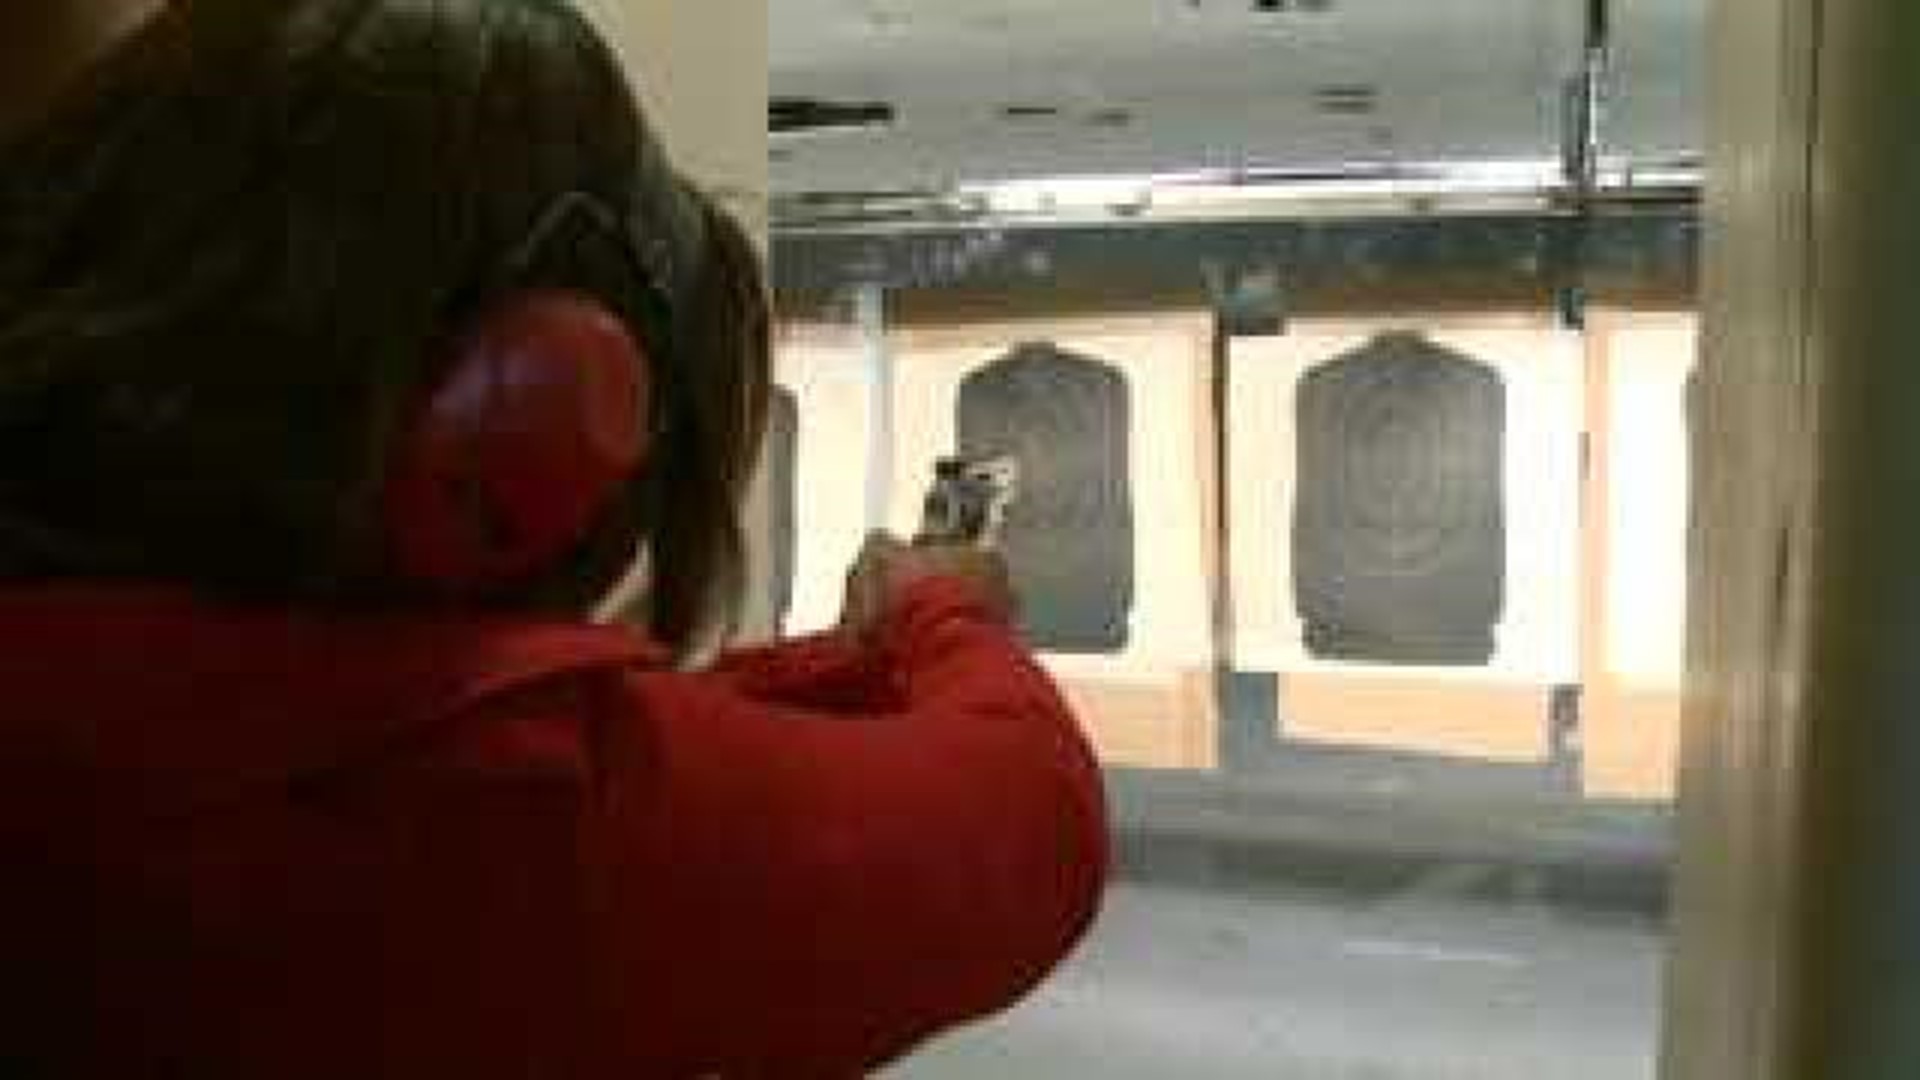 Concealed carry permits arriving in Illinois